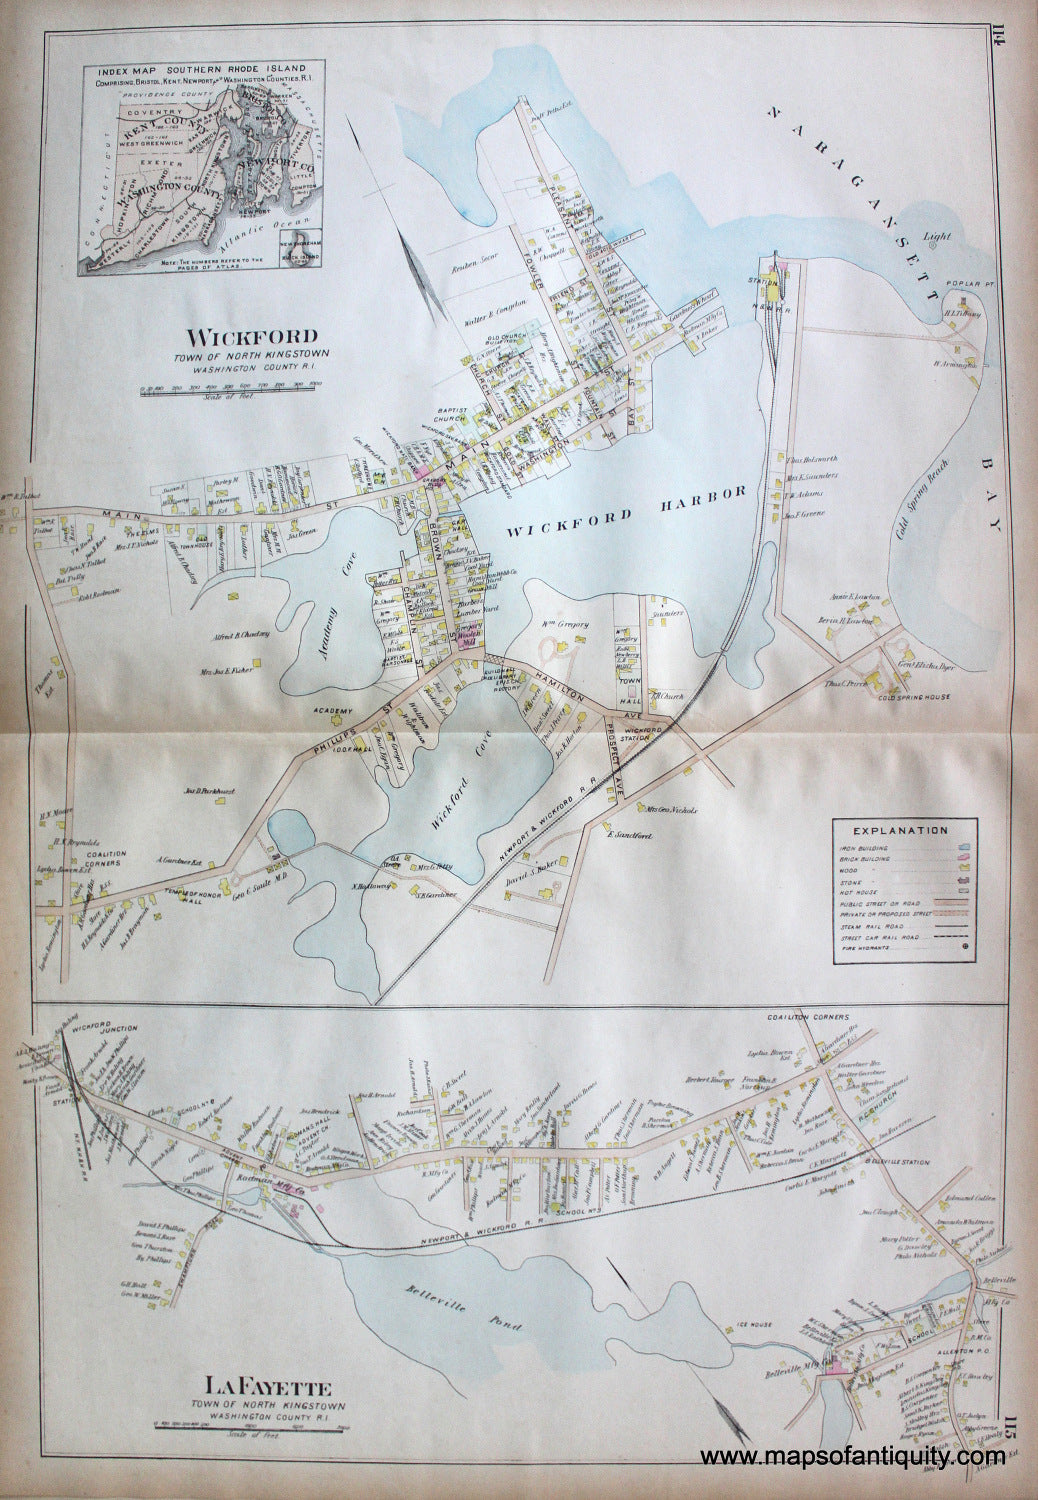 Antique-Map-Town-of-North-Kingston-Wickford-LaFayette-Rhode-Island